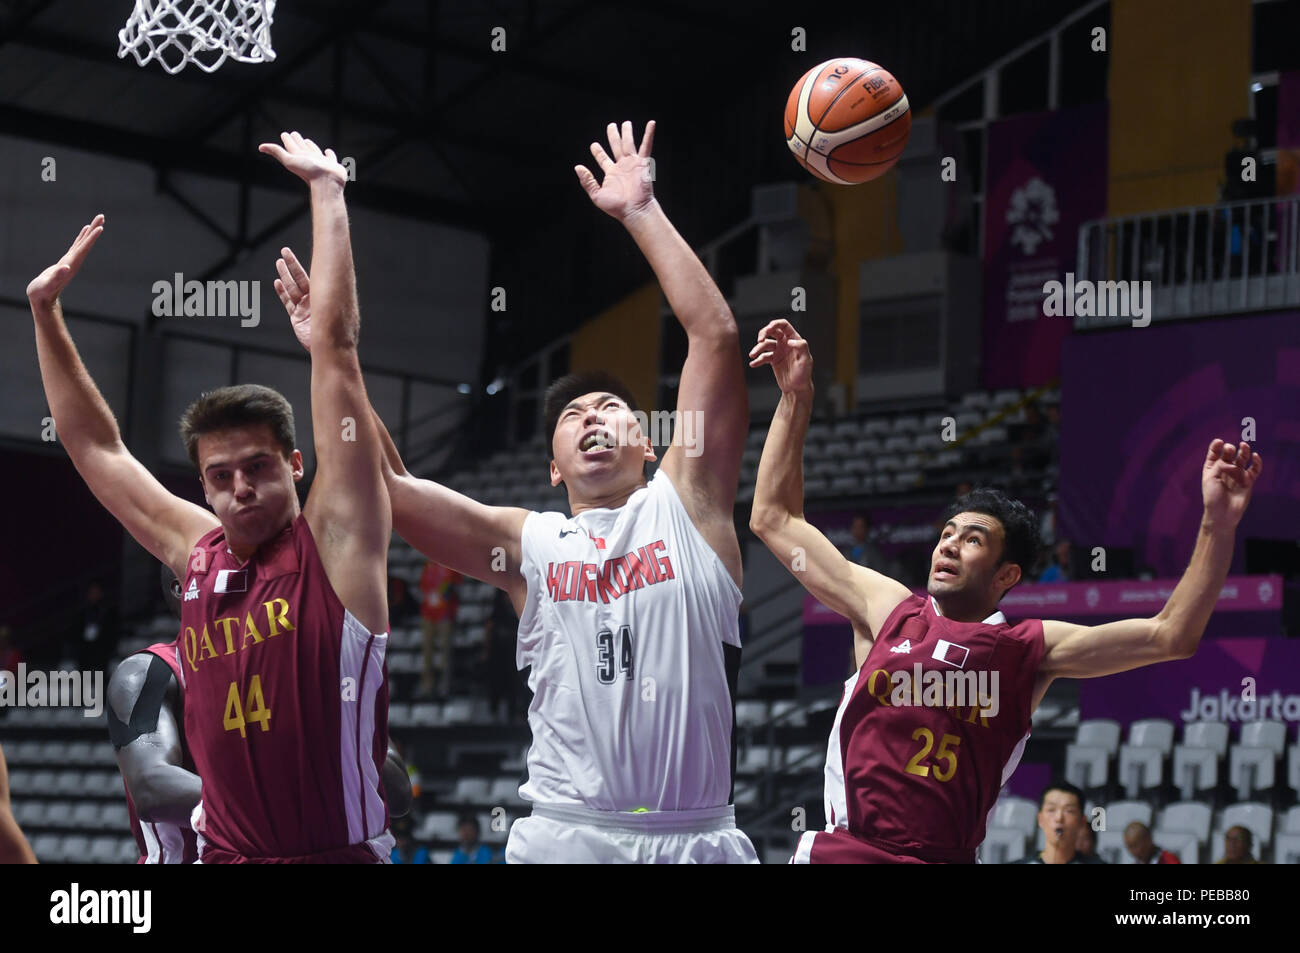 Jakarta. 14th Aug, 2018. Szeto Wai Kit(C) of China's Hong Kong competes  with Qatar's Faris Avdic (L) and Khaled Abdelbaset during the men's  basketball 5x5 Group C match between Qatar and China's